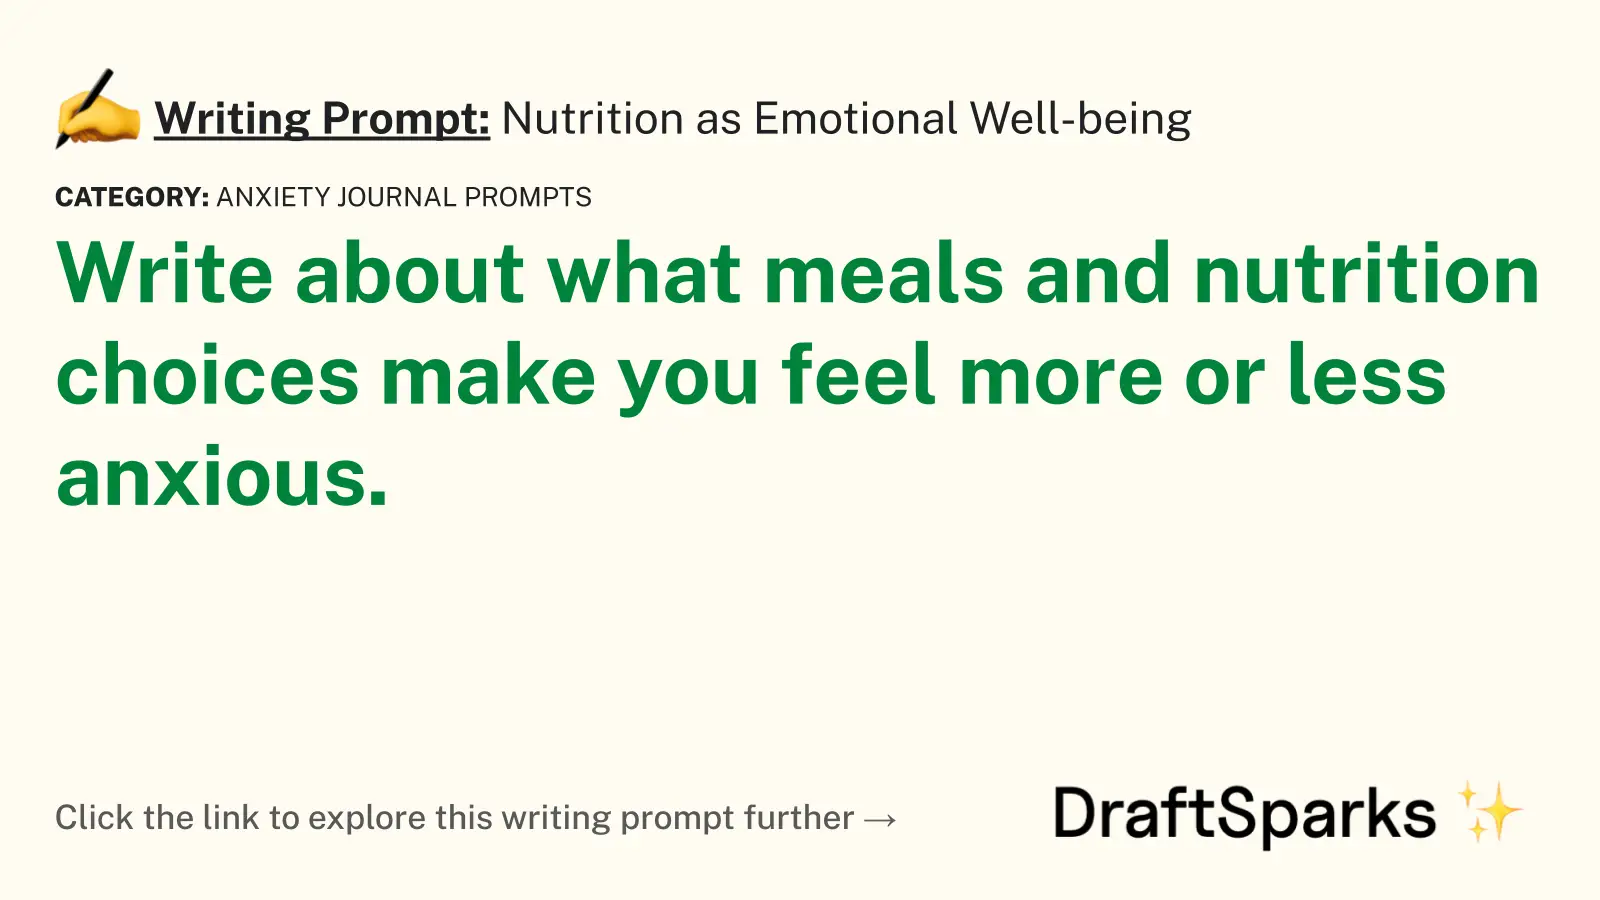 Nutrition as Emotional Well-being